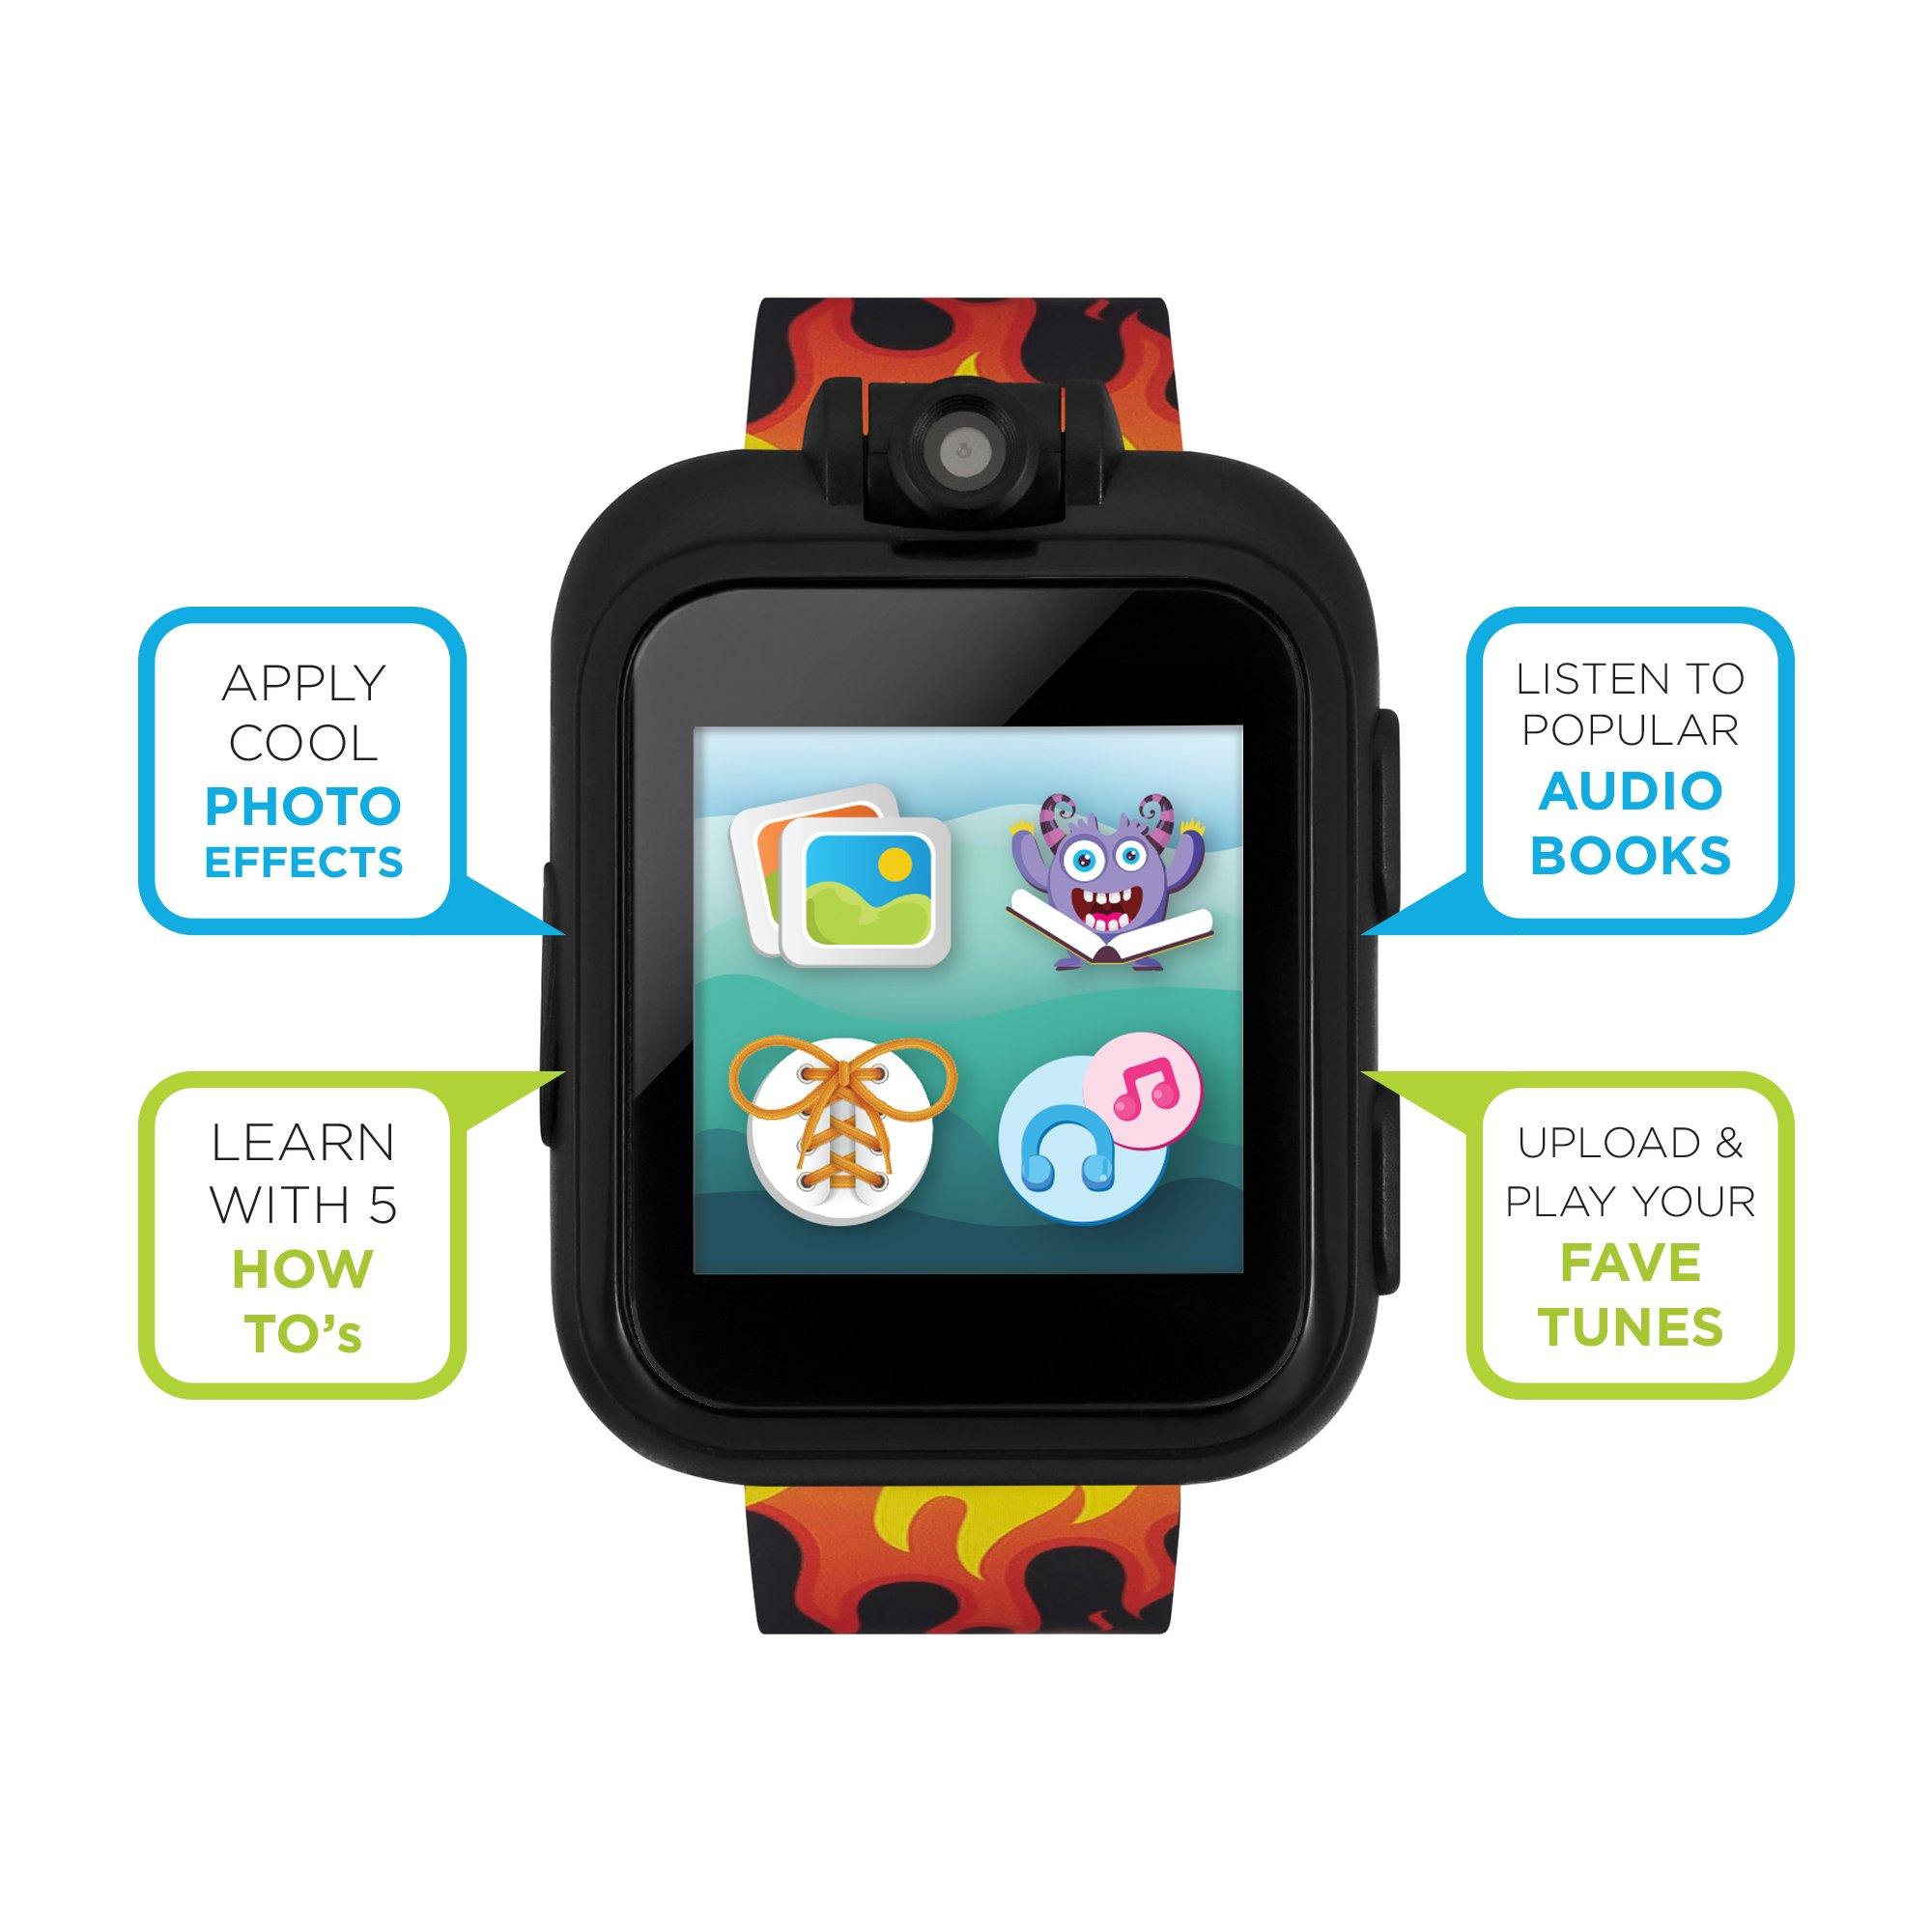 PlayZoom 2 Kids Smartwatch: Black Racing Flames affordable smart watch